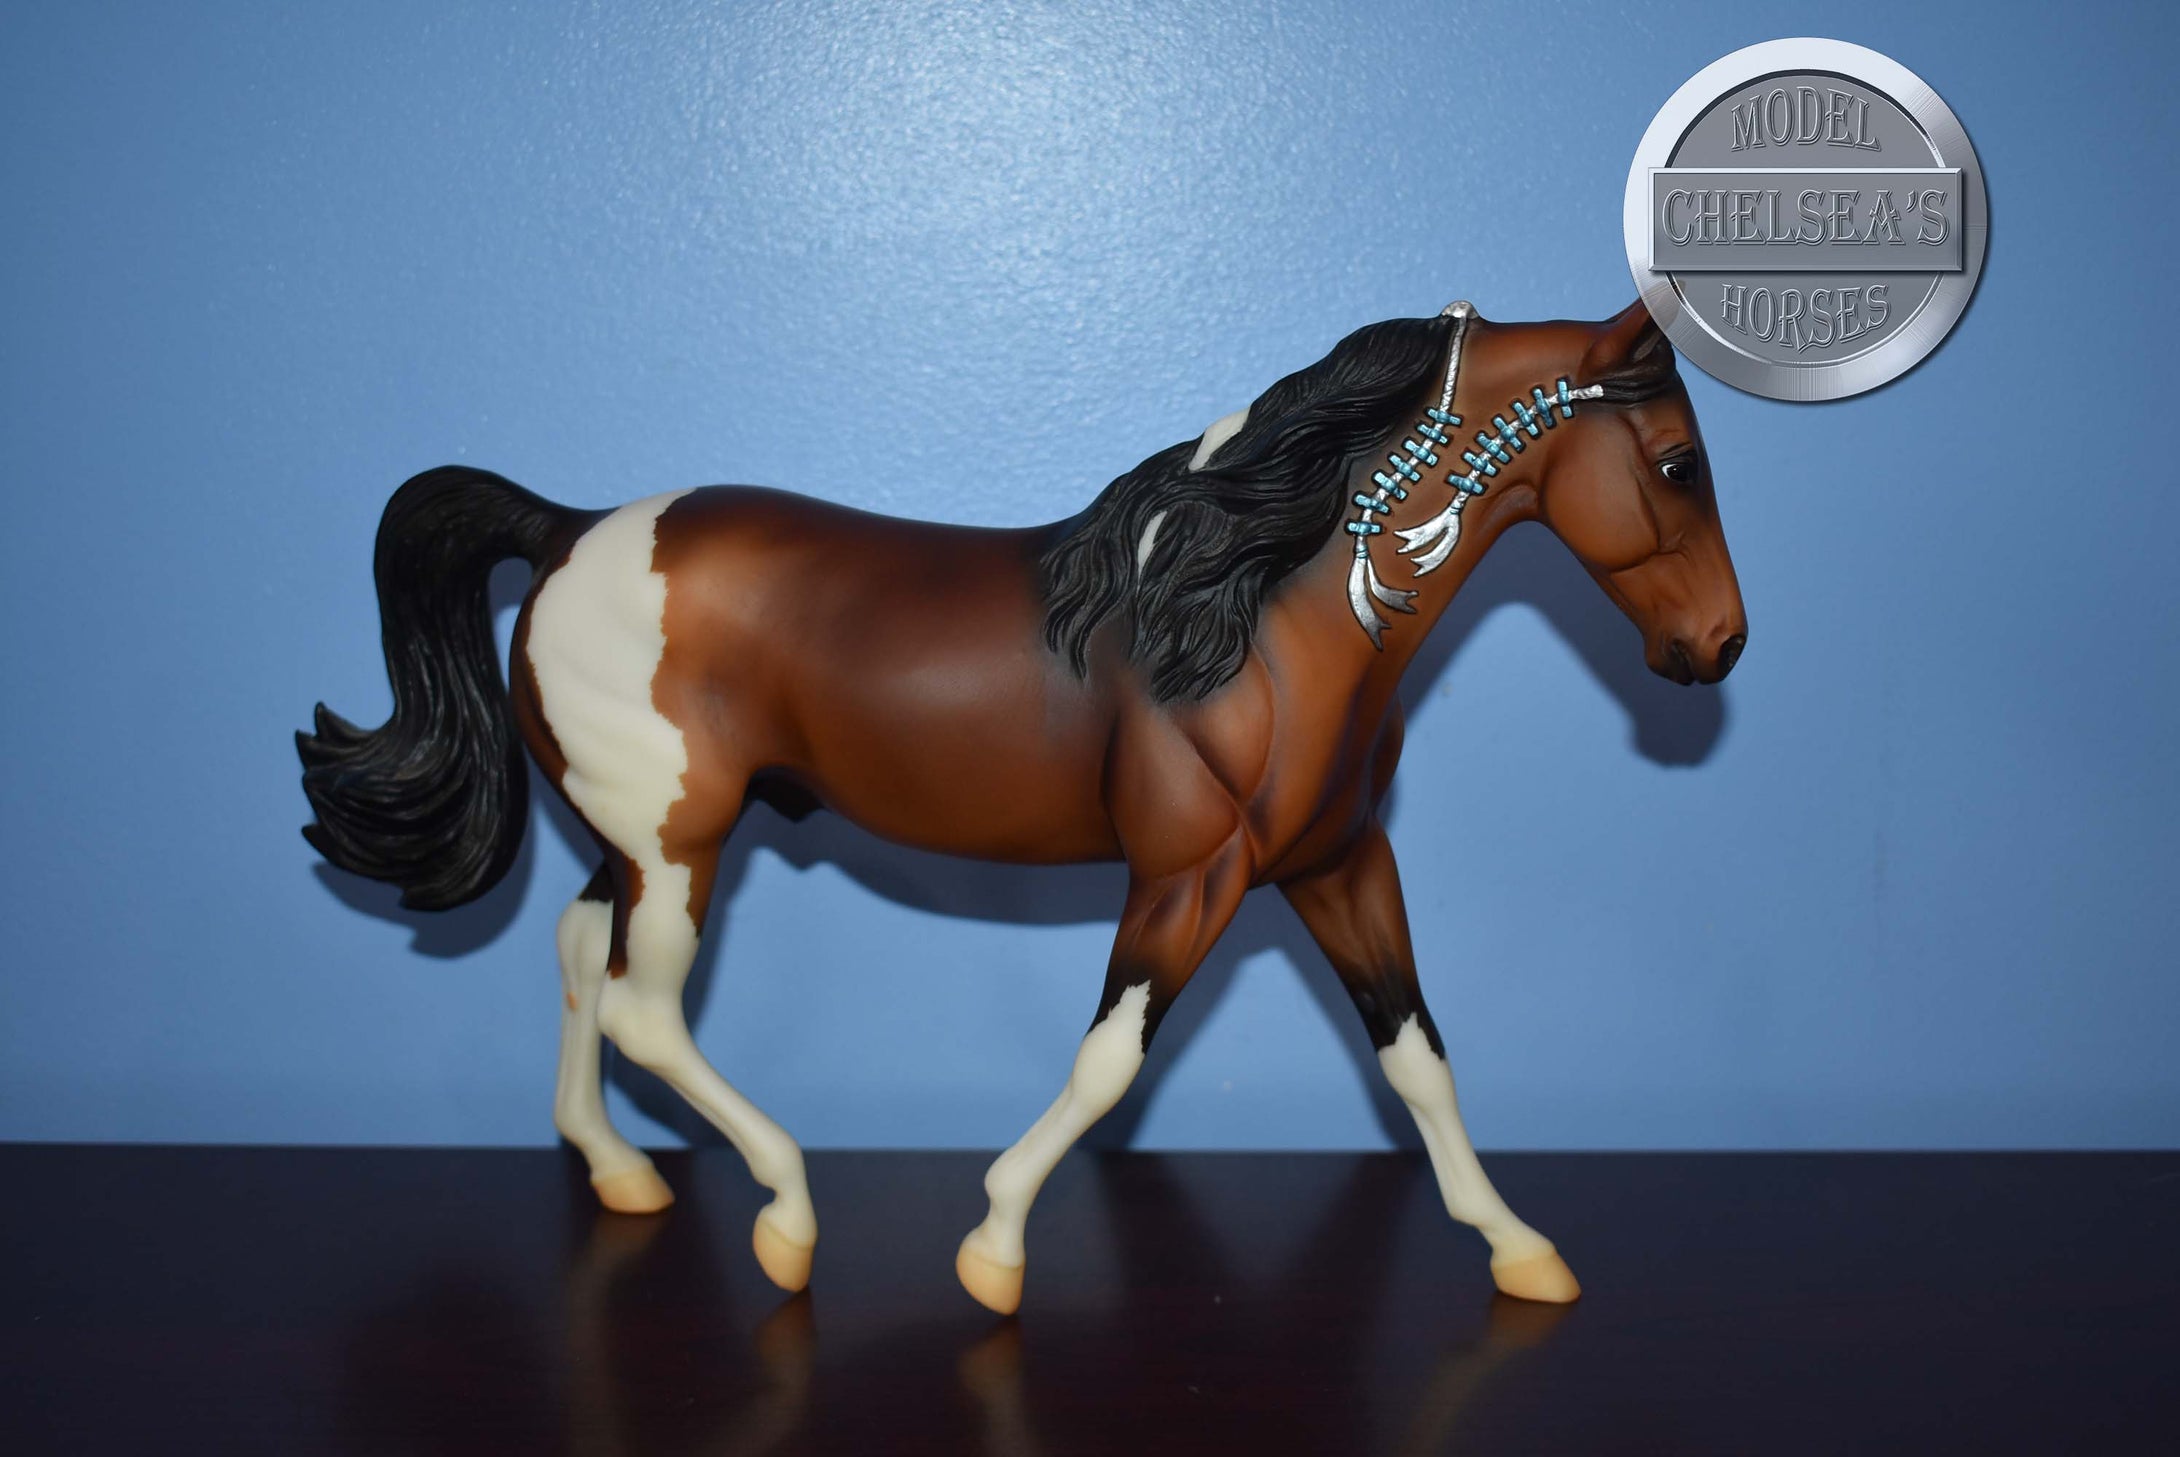 Double Trouble-Missouri Fox Trotter Mold-Breyer Traditional